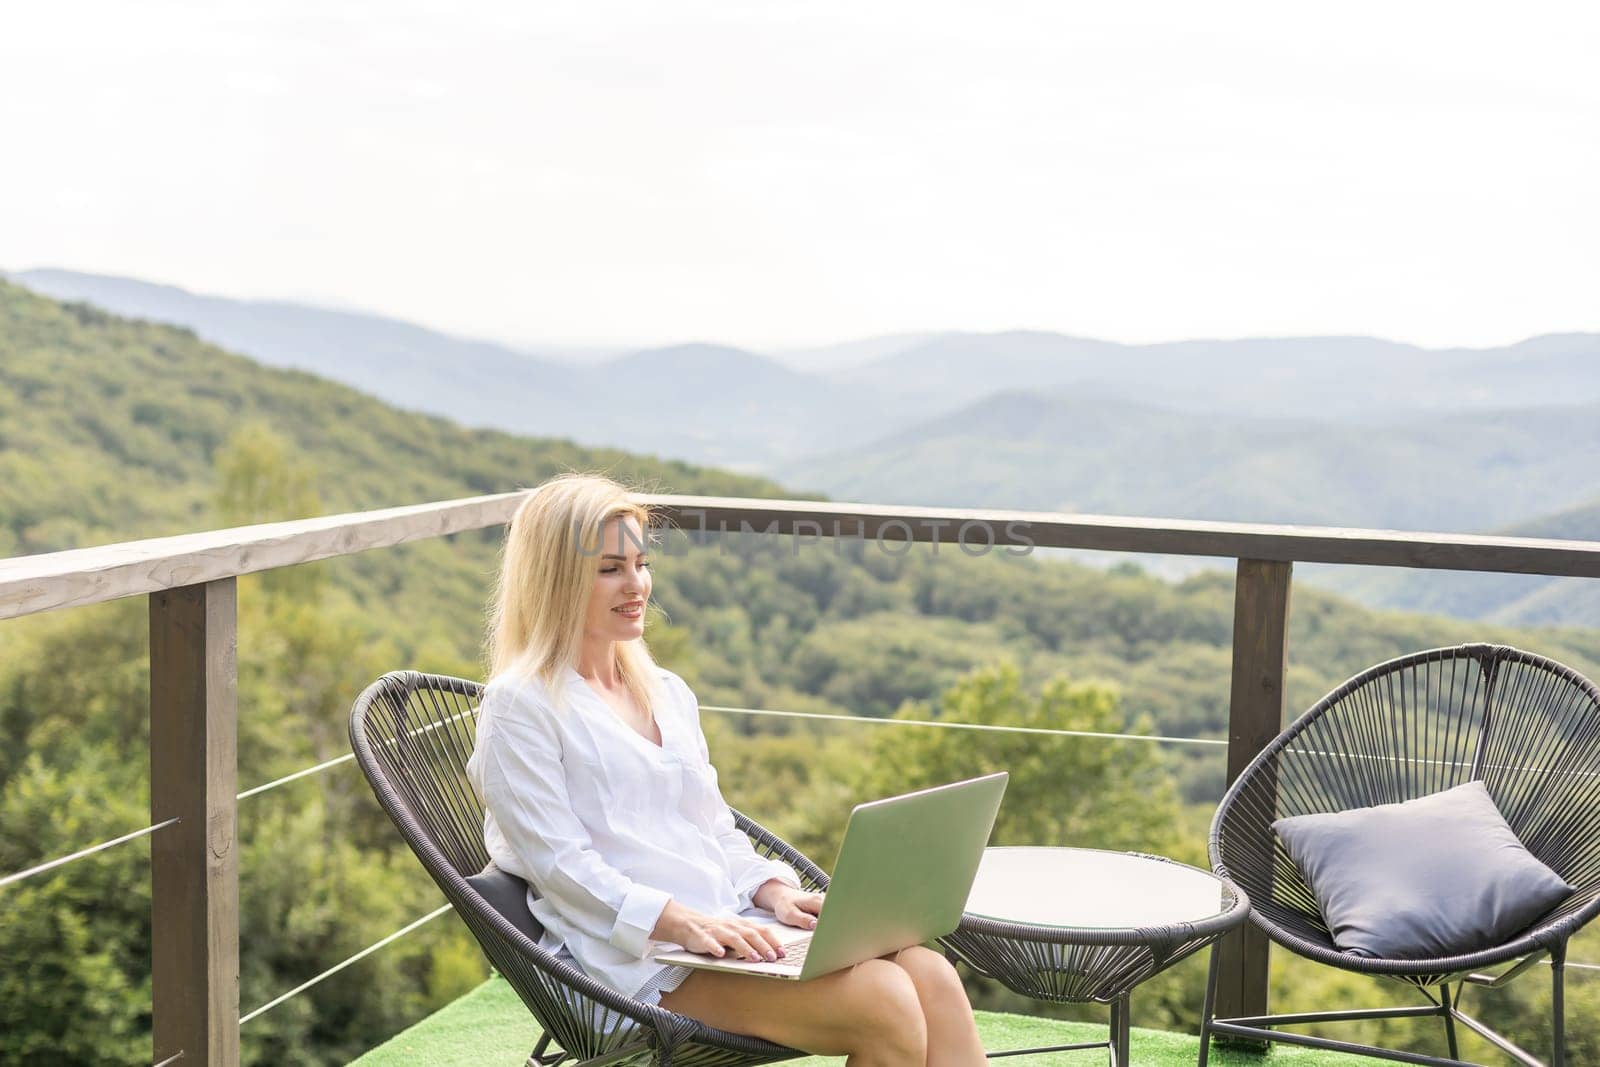 A young woman, freelancer is working on a laptop remotely on a balcony in the open fresh air near the mountains in warm sunny weather